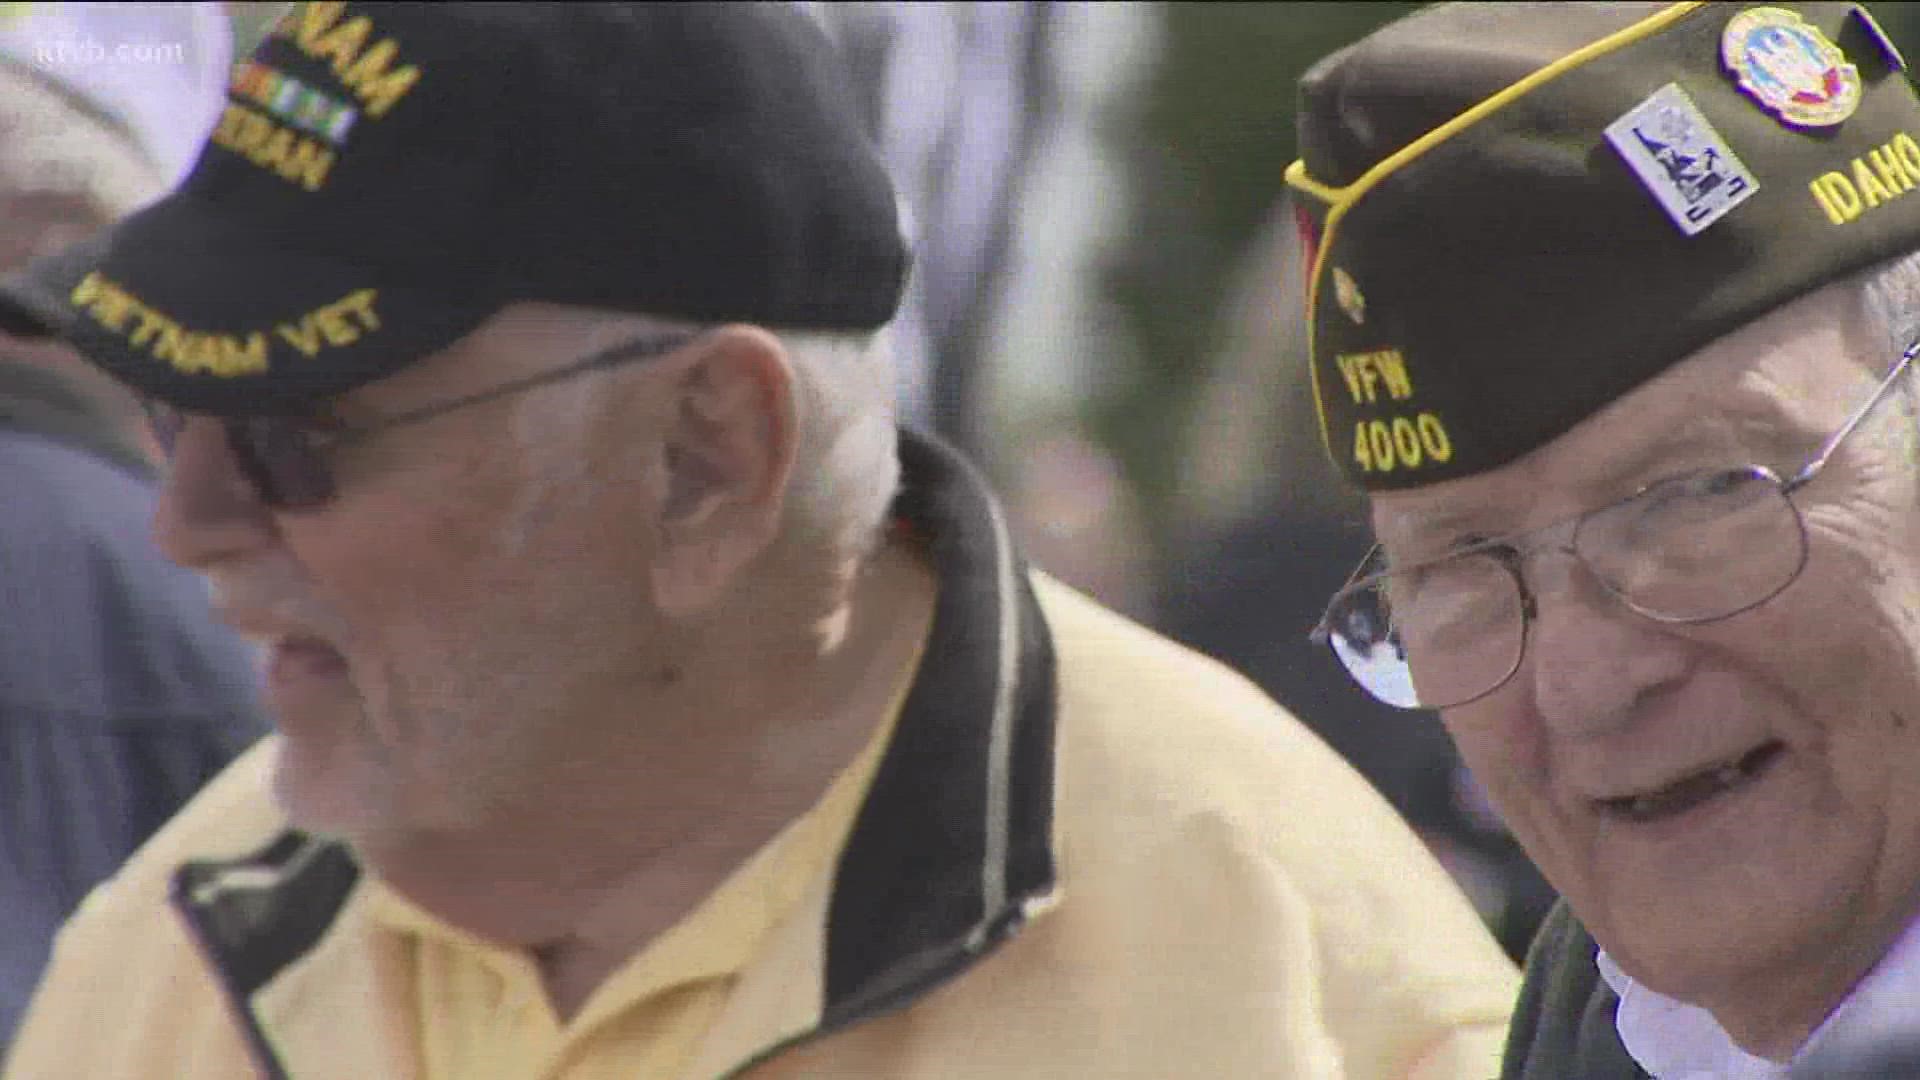 A ceremony honoring all who served between 1959 and 1975 took place Tuesday at Kleiner Park in Meridian, Idaho.